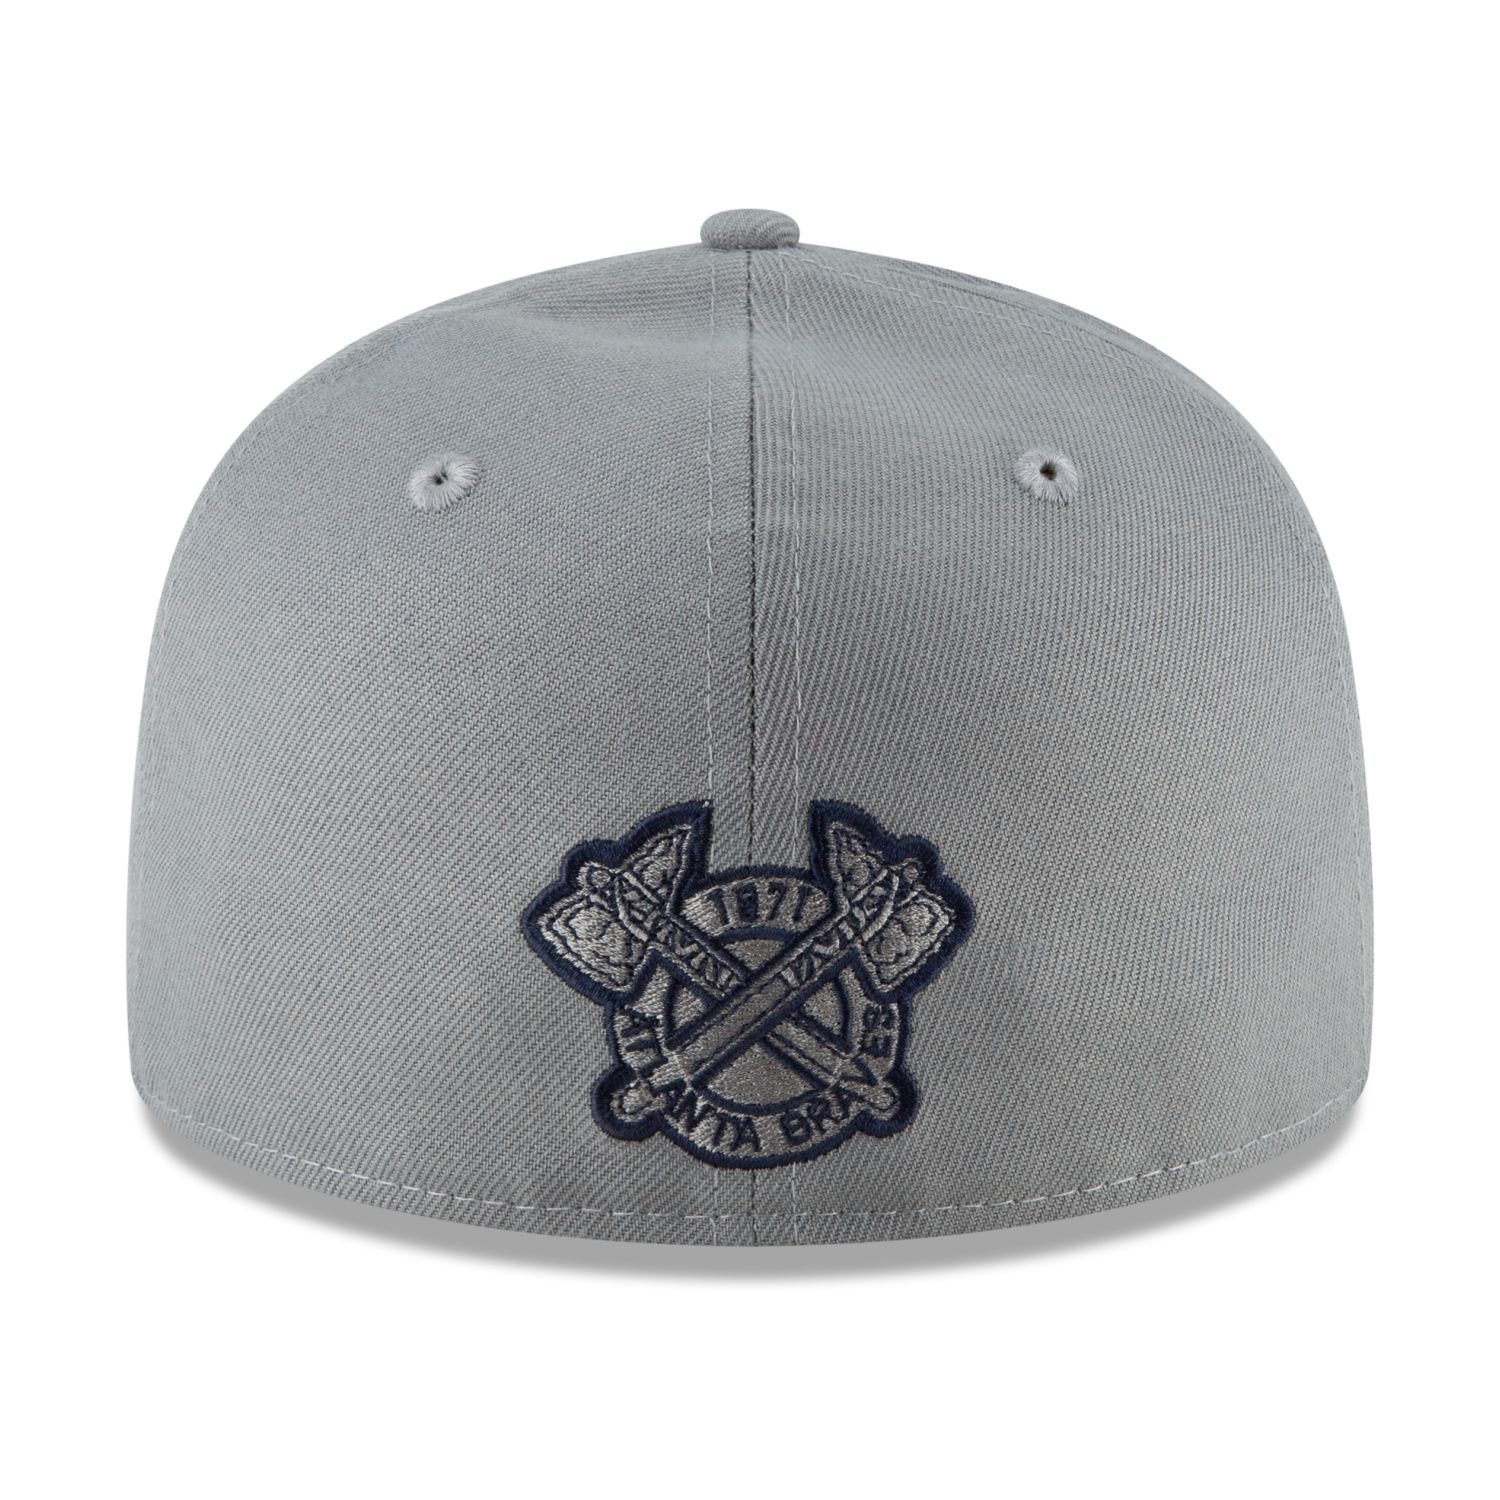 New Era Fitted Cap 59Fifty MLB Team GREY Braves STORM Atlanta Cooperstown